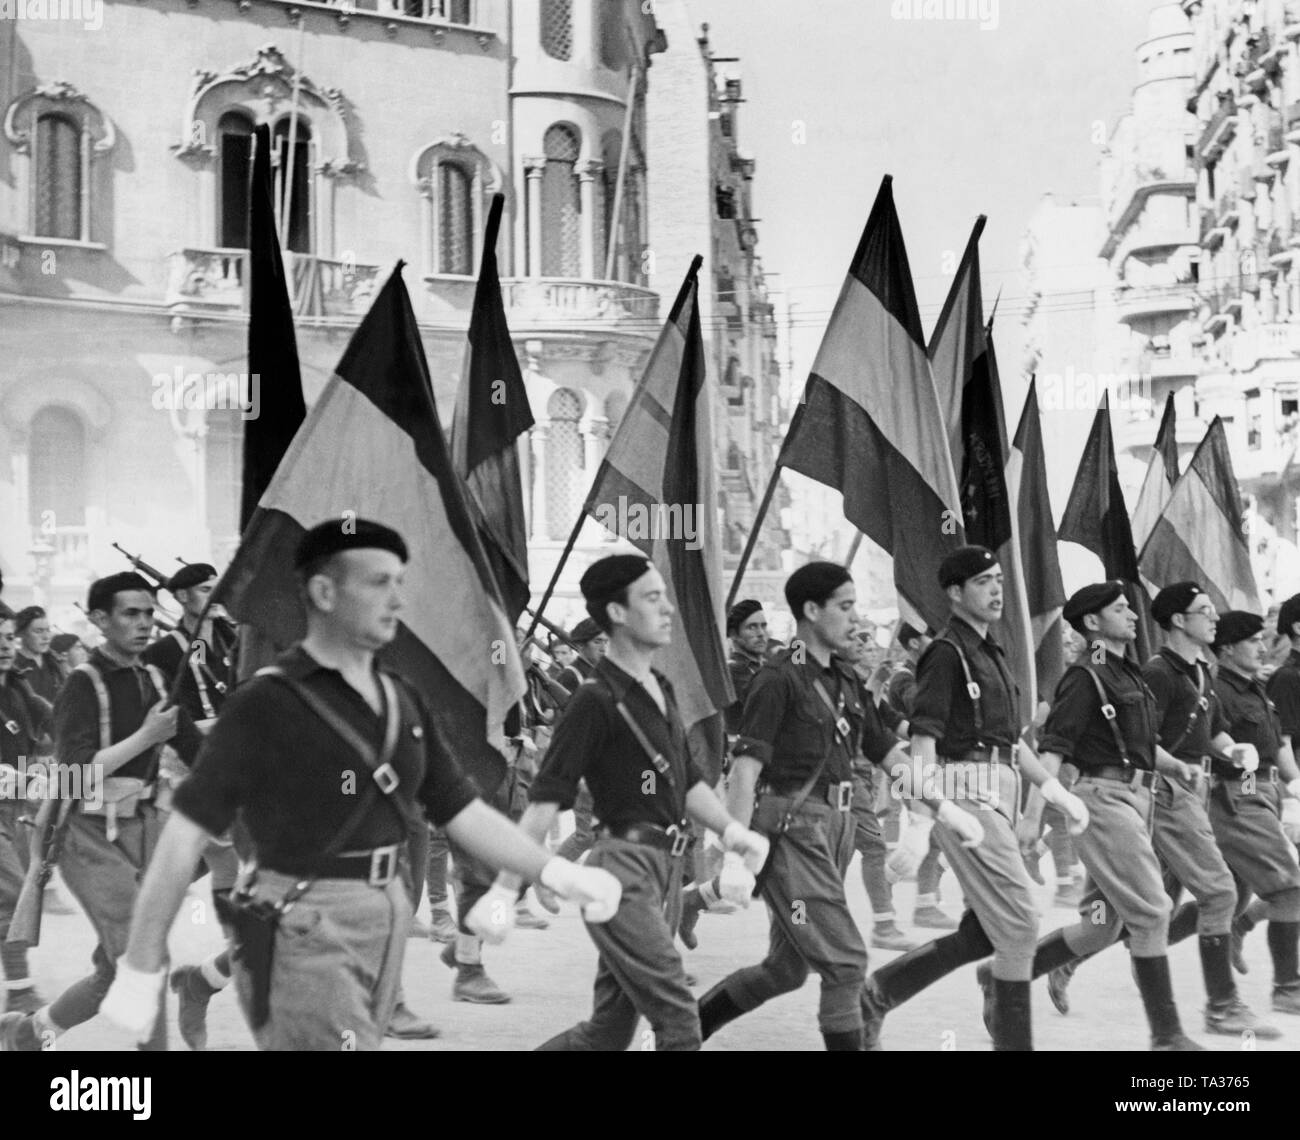 A group of Falangists of the Fascist Party (Falange Espanola Tradicionalista de las JONS) in blue shirts at the victory parade after the invasion of Barcelona in March 1939. Stock Photo